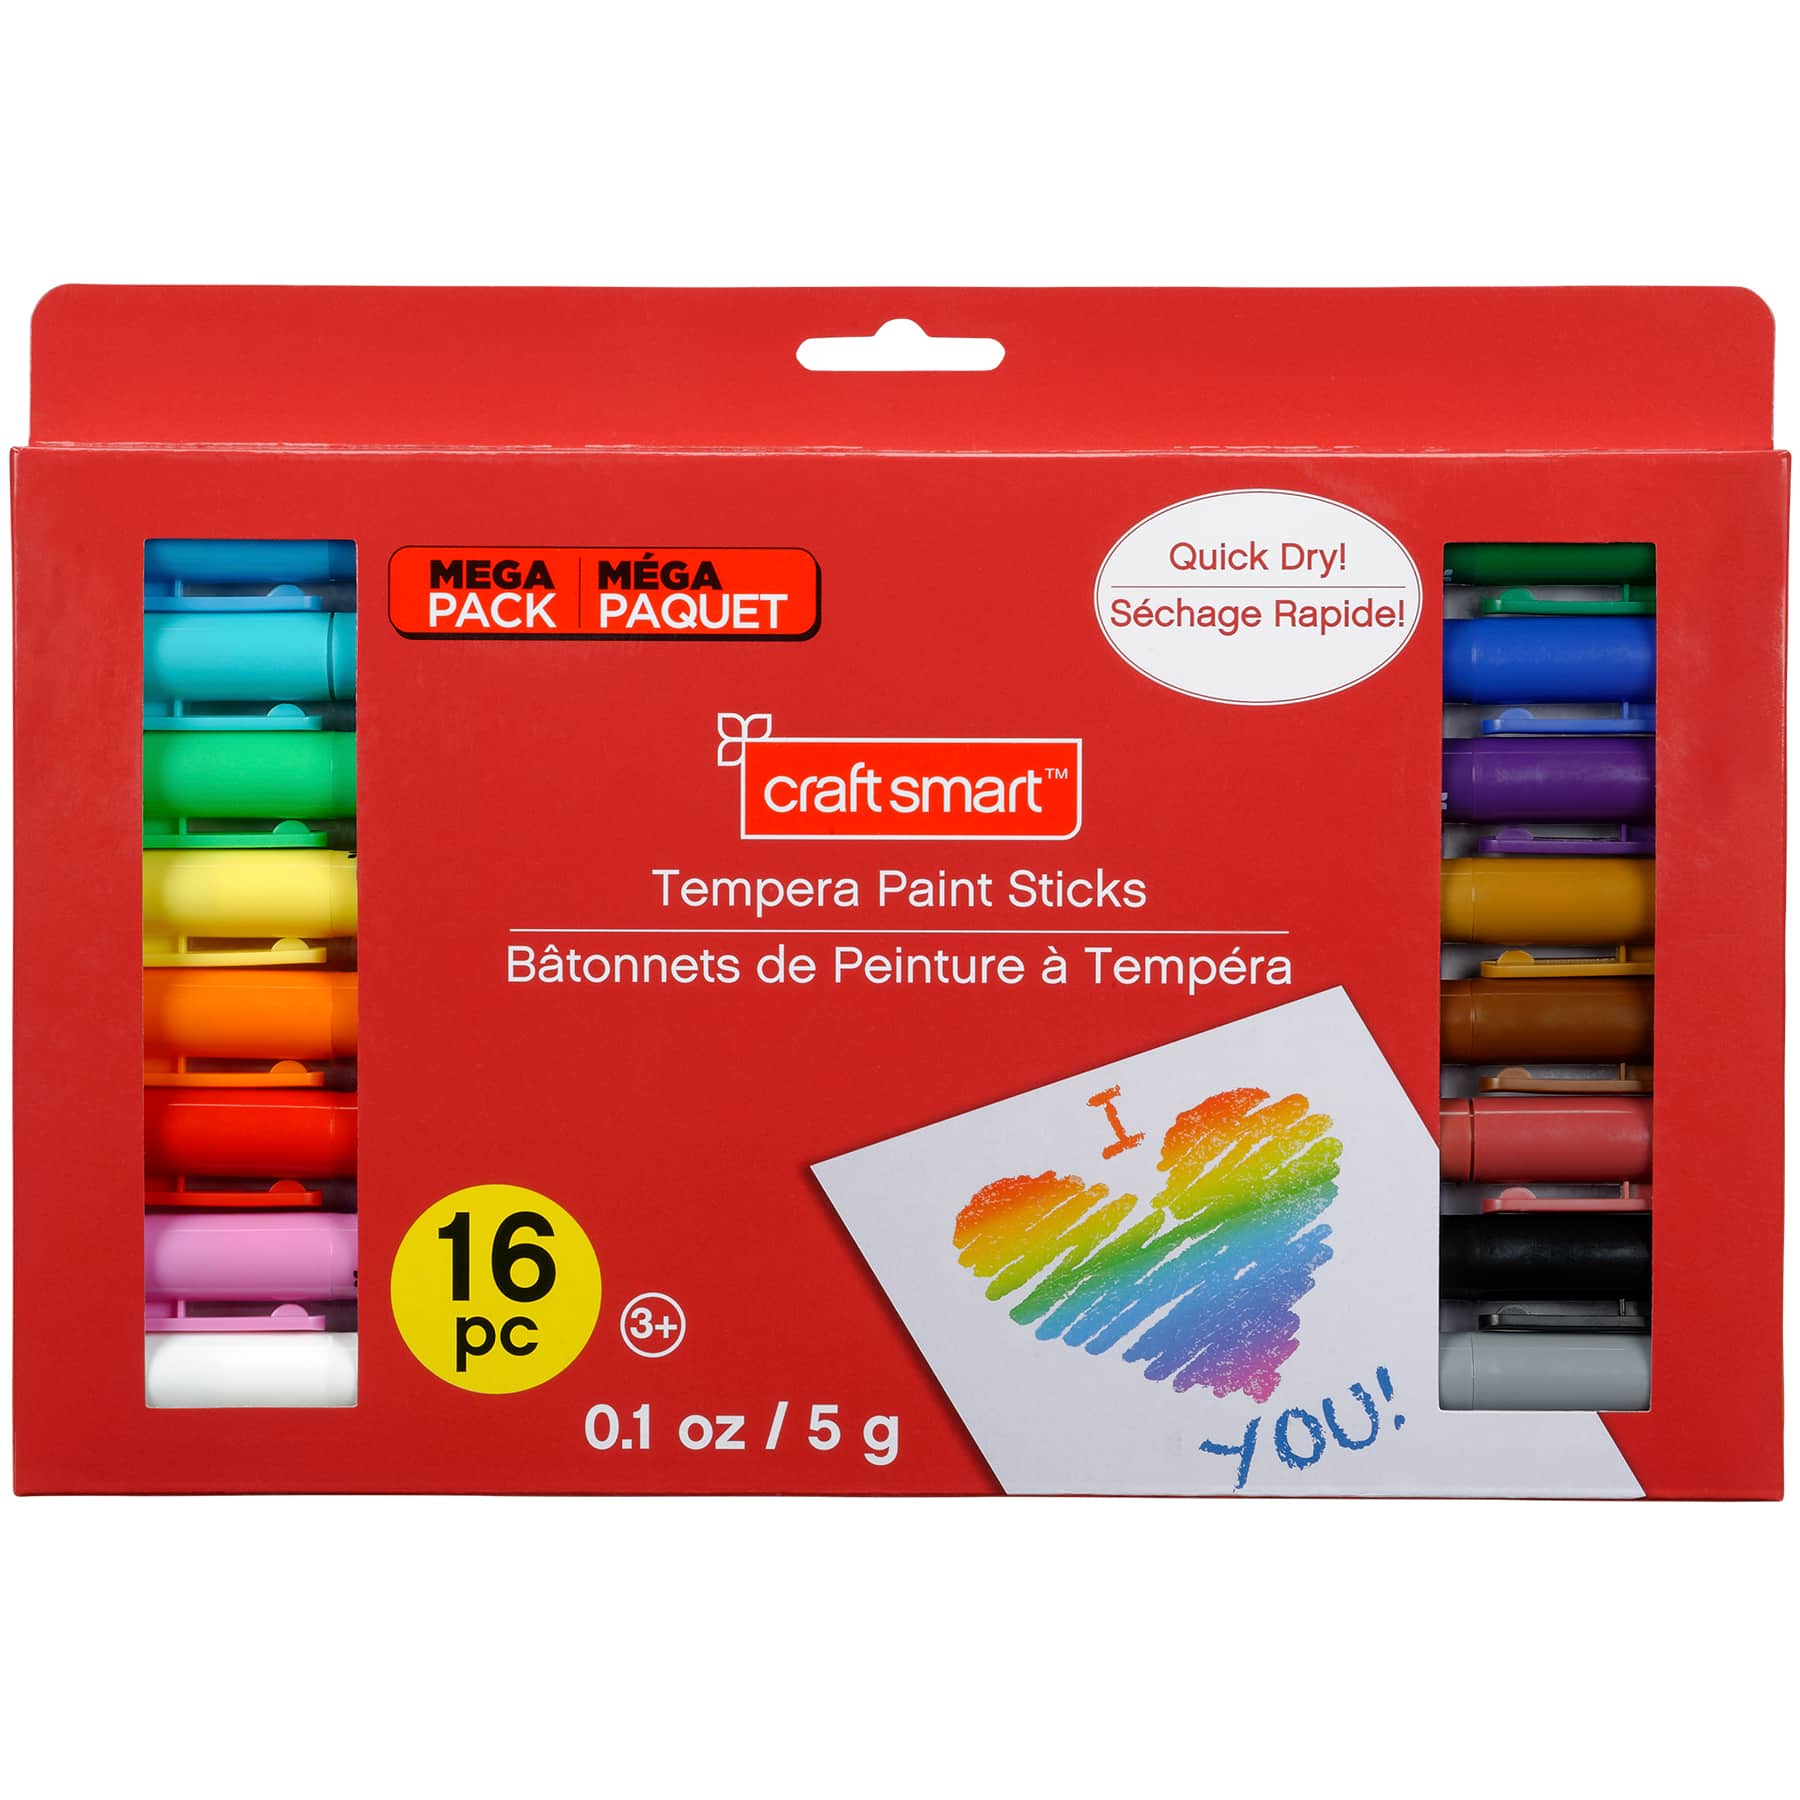  Washable Tempera Paint Sticks, 30 Colors with 1 Drawing Pad -  Set of 31 : Toys & Games